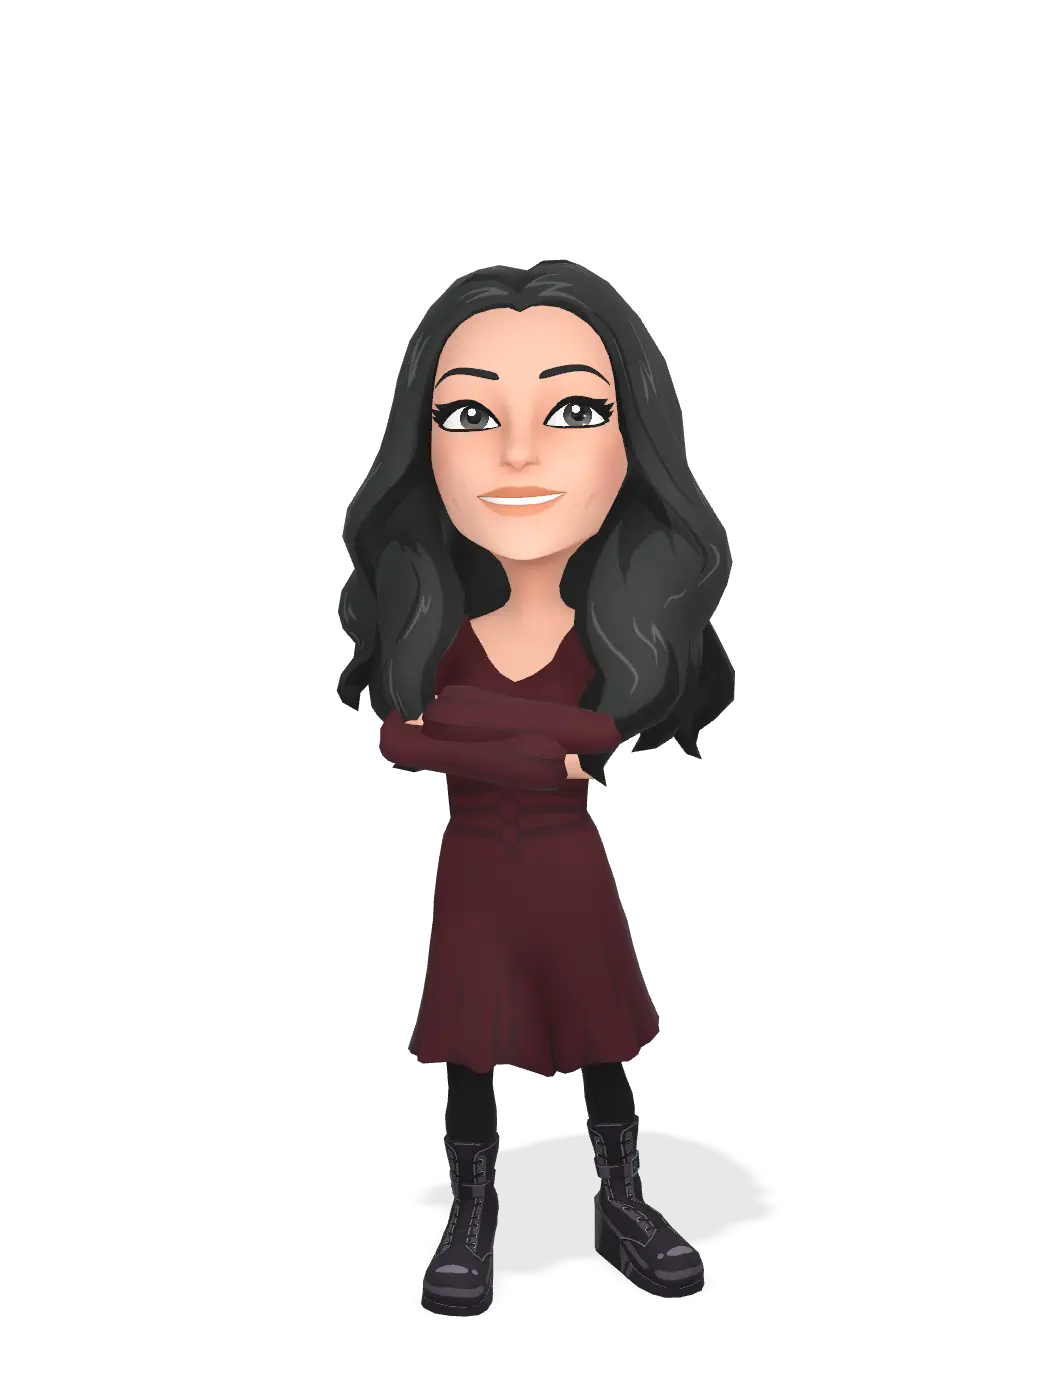 3D Bitmoji for products066